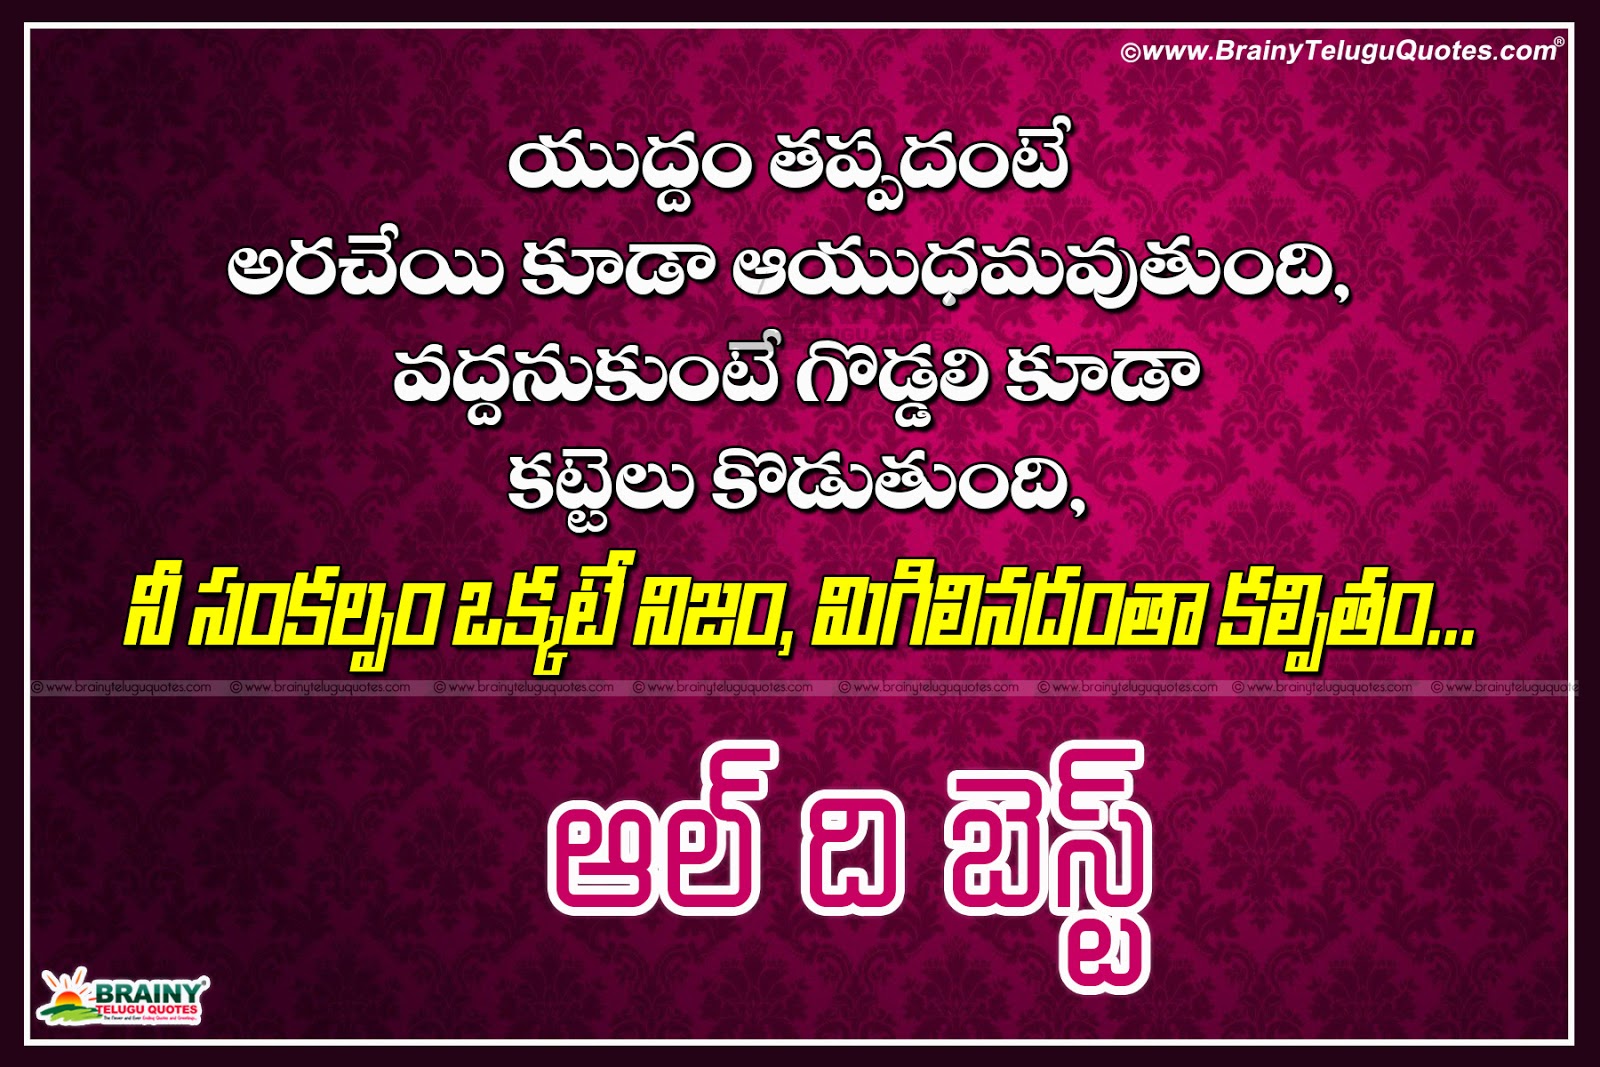 All The Best Wishes Telugu Greetings SMS Quotes Images ...